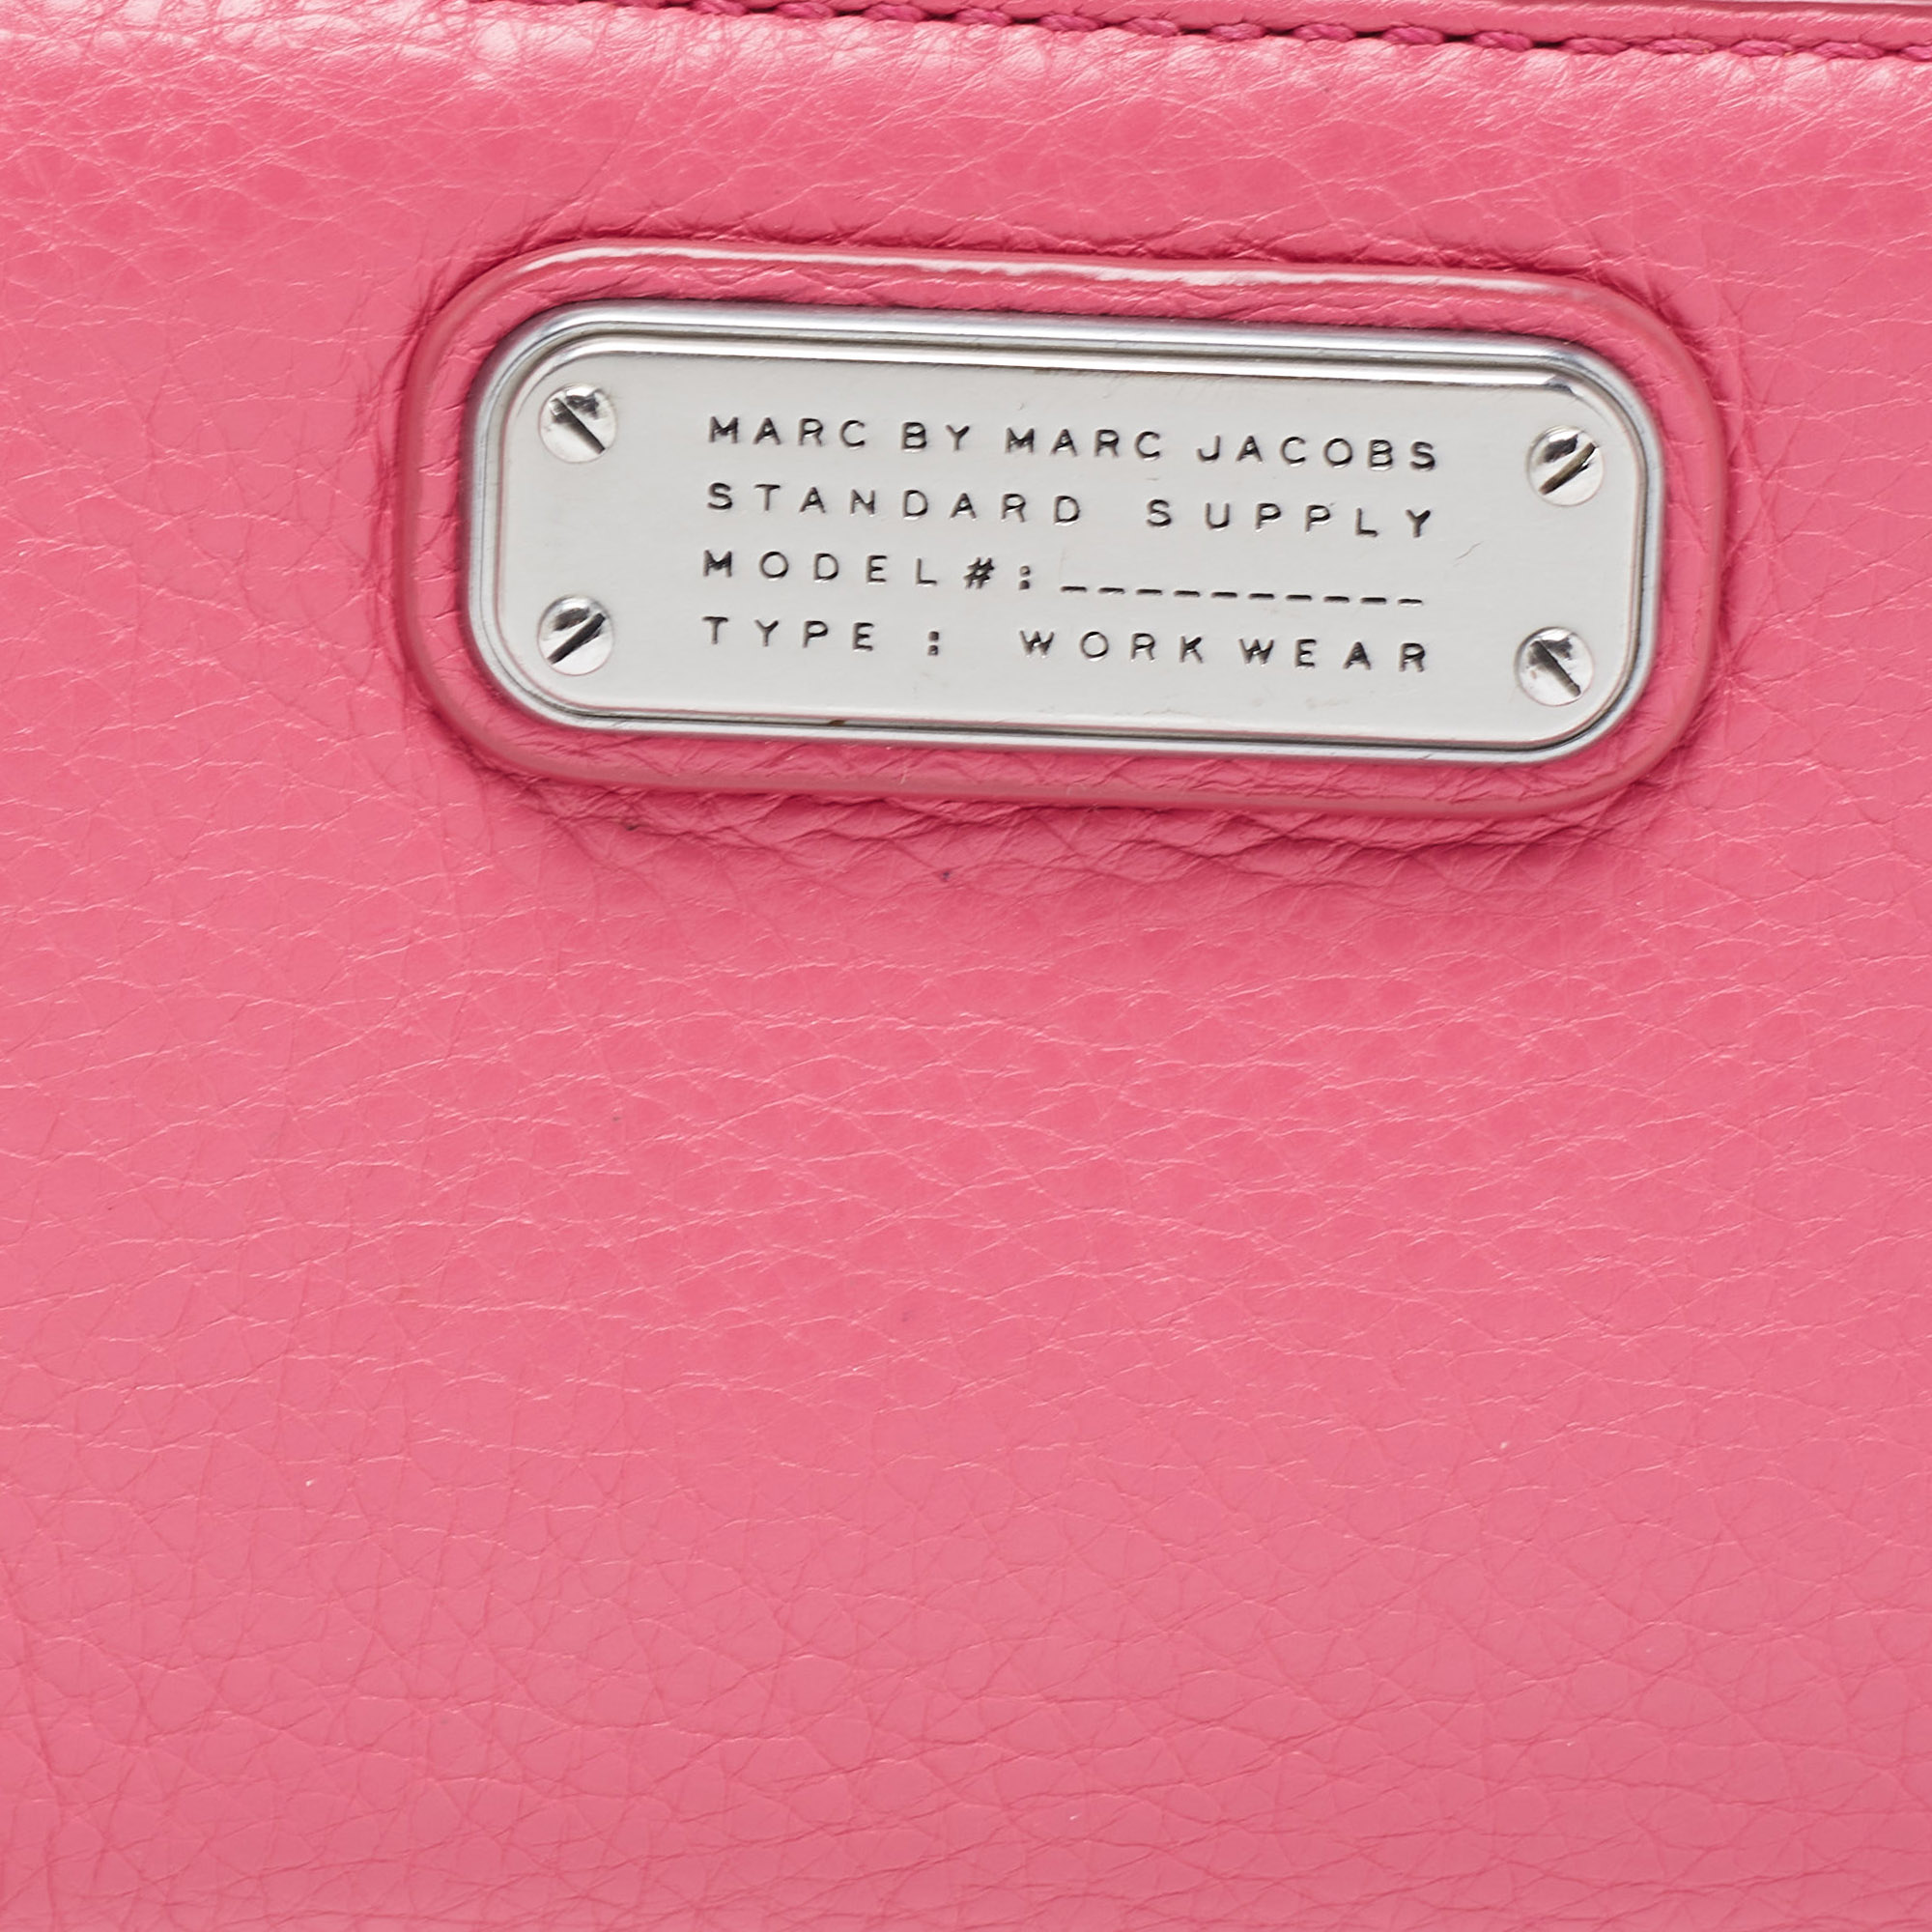 Marc By Marc Jacobs Pink Leather Zip Around Wallet